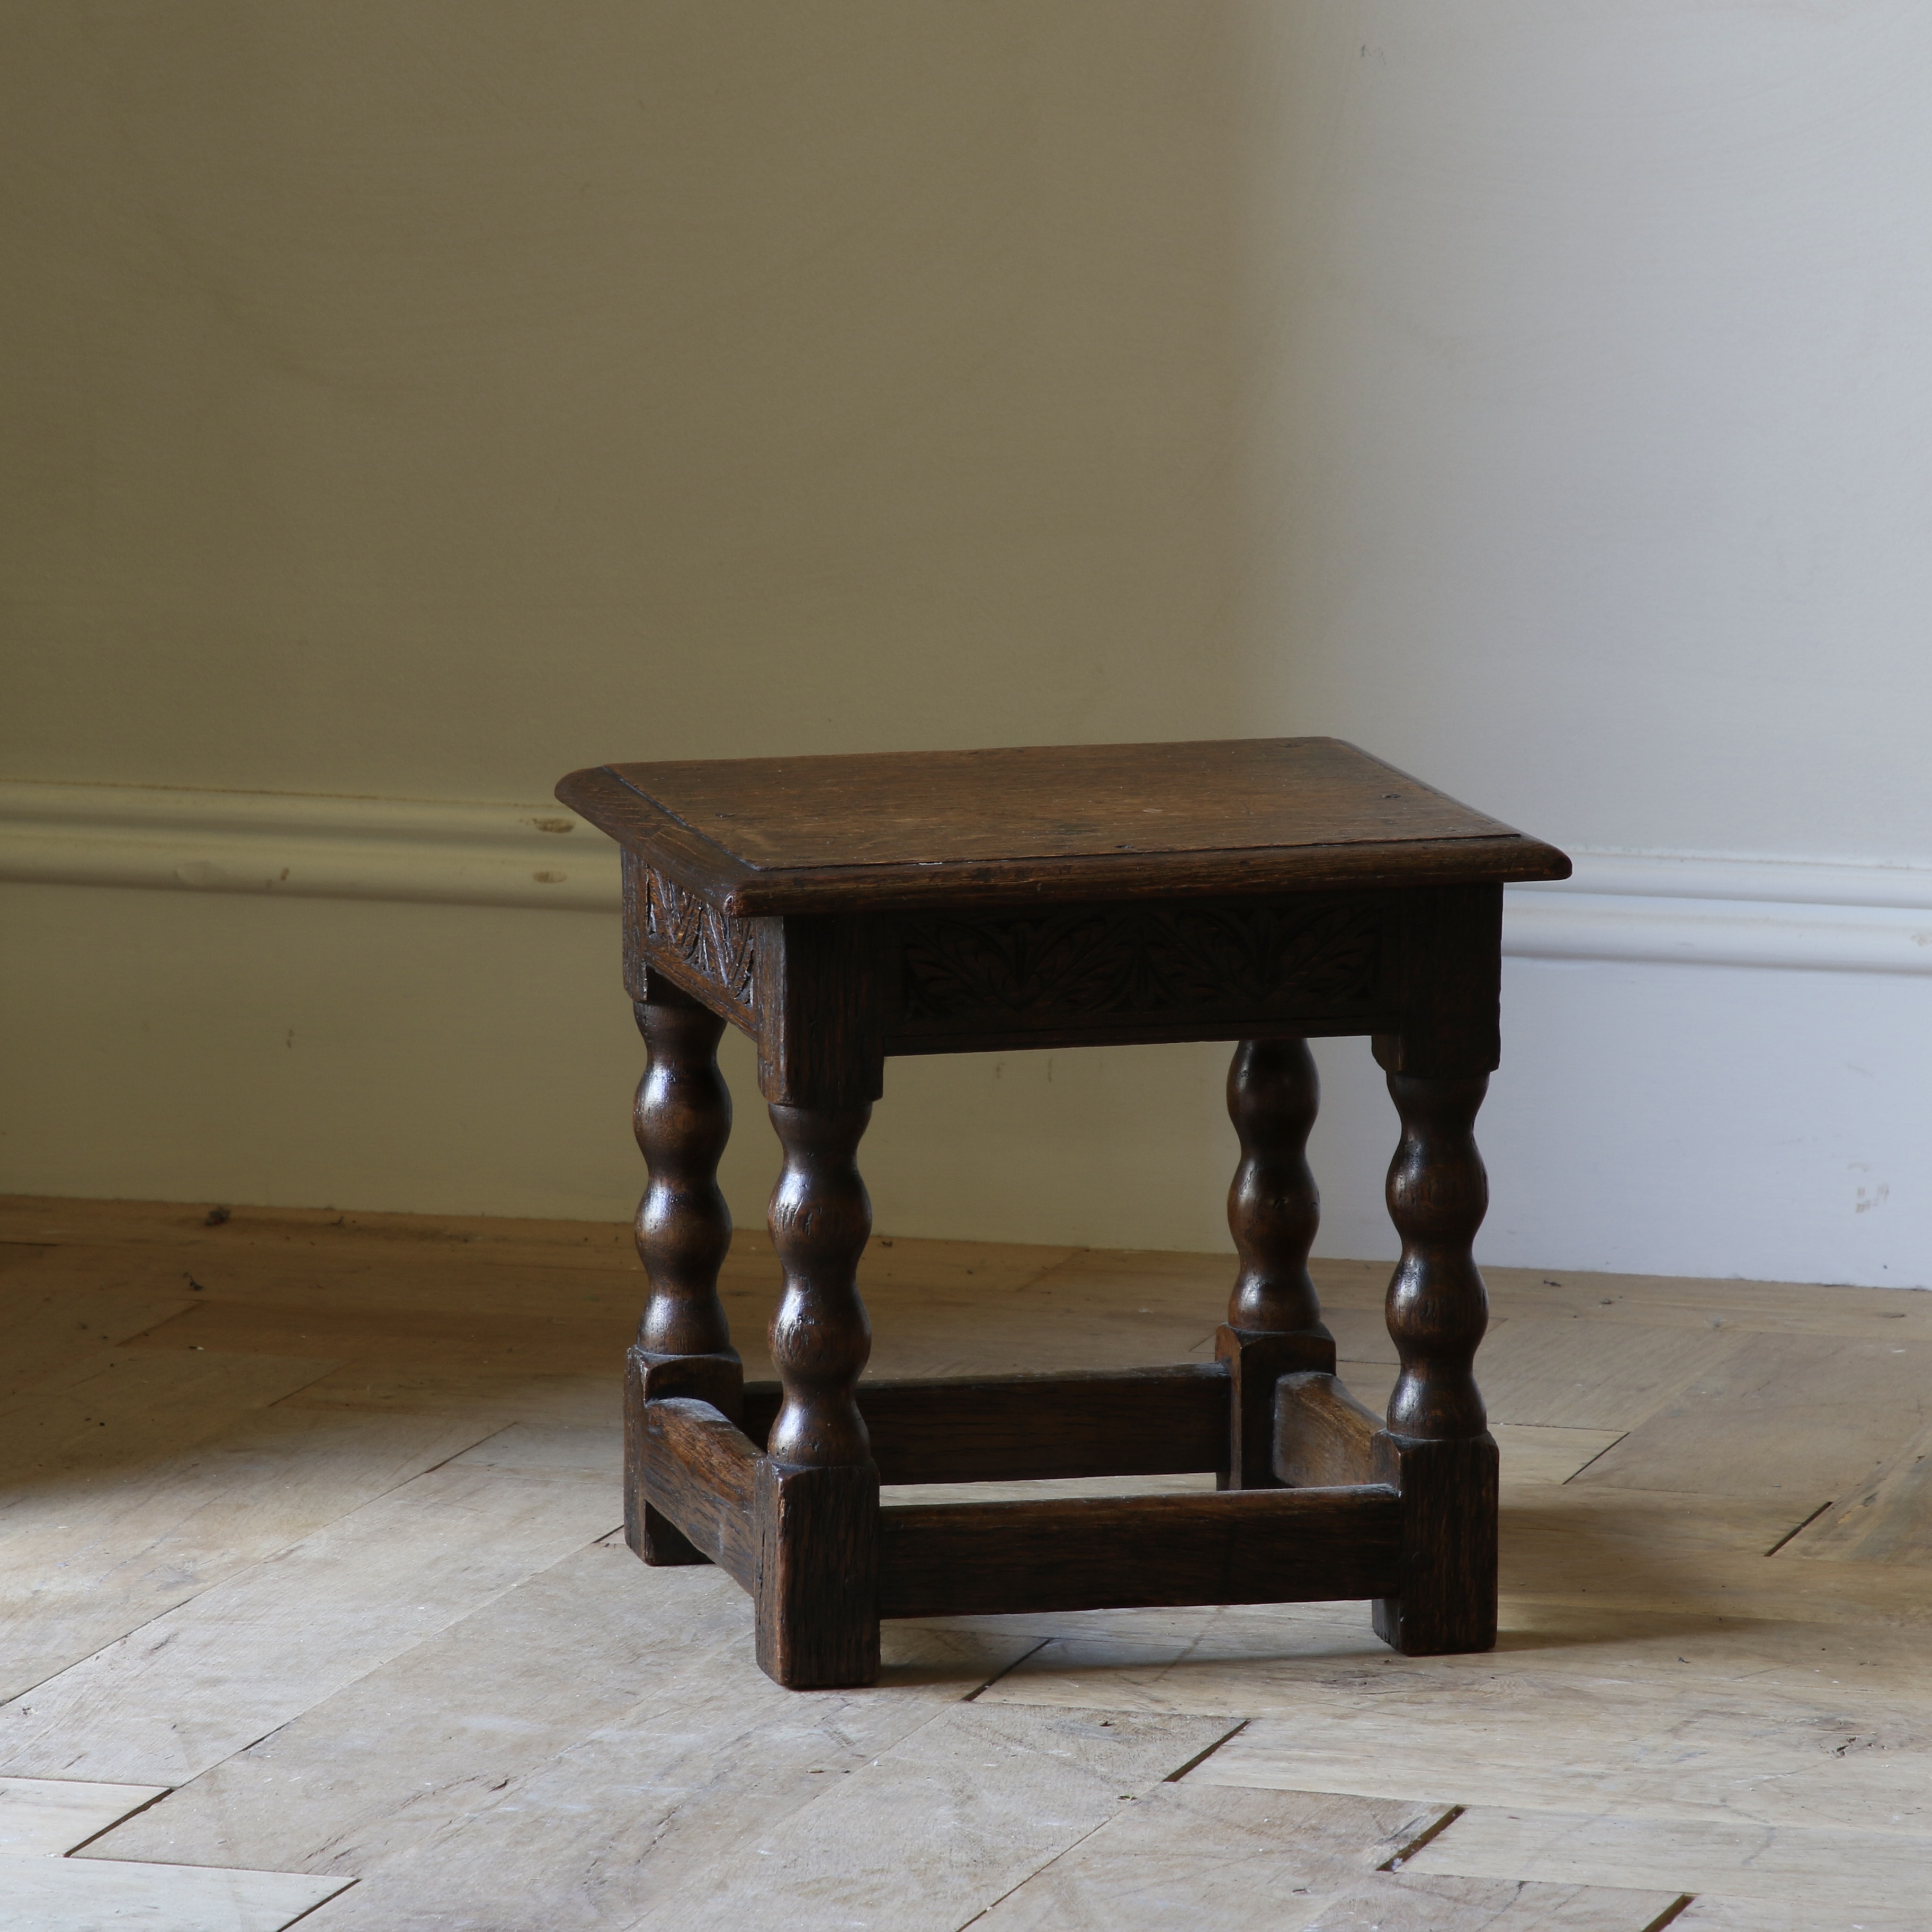 Square Jointed Stool